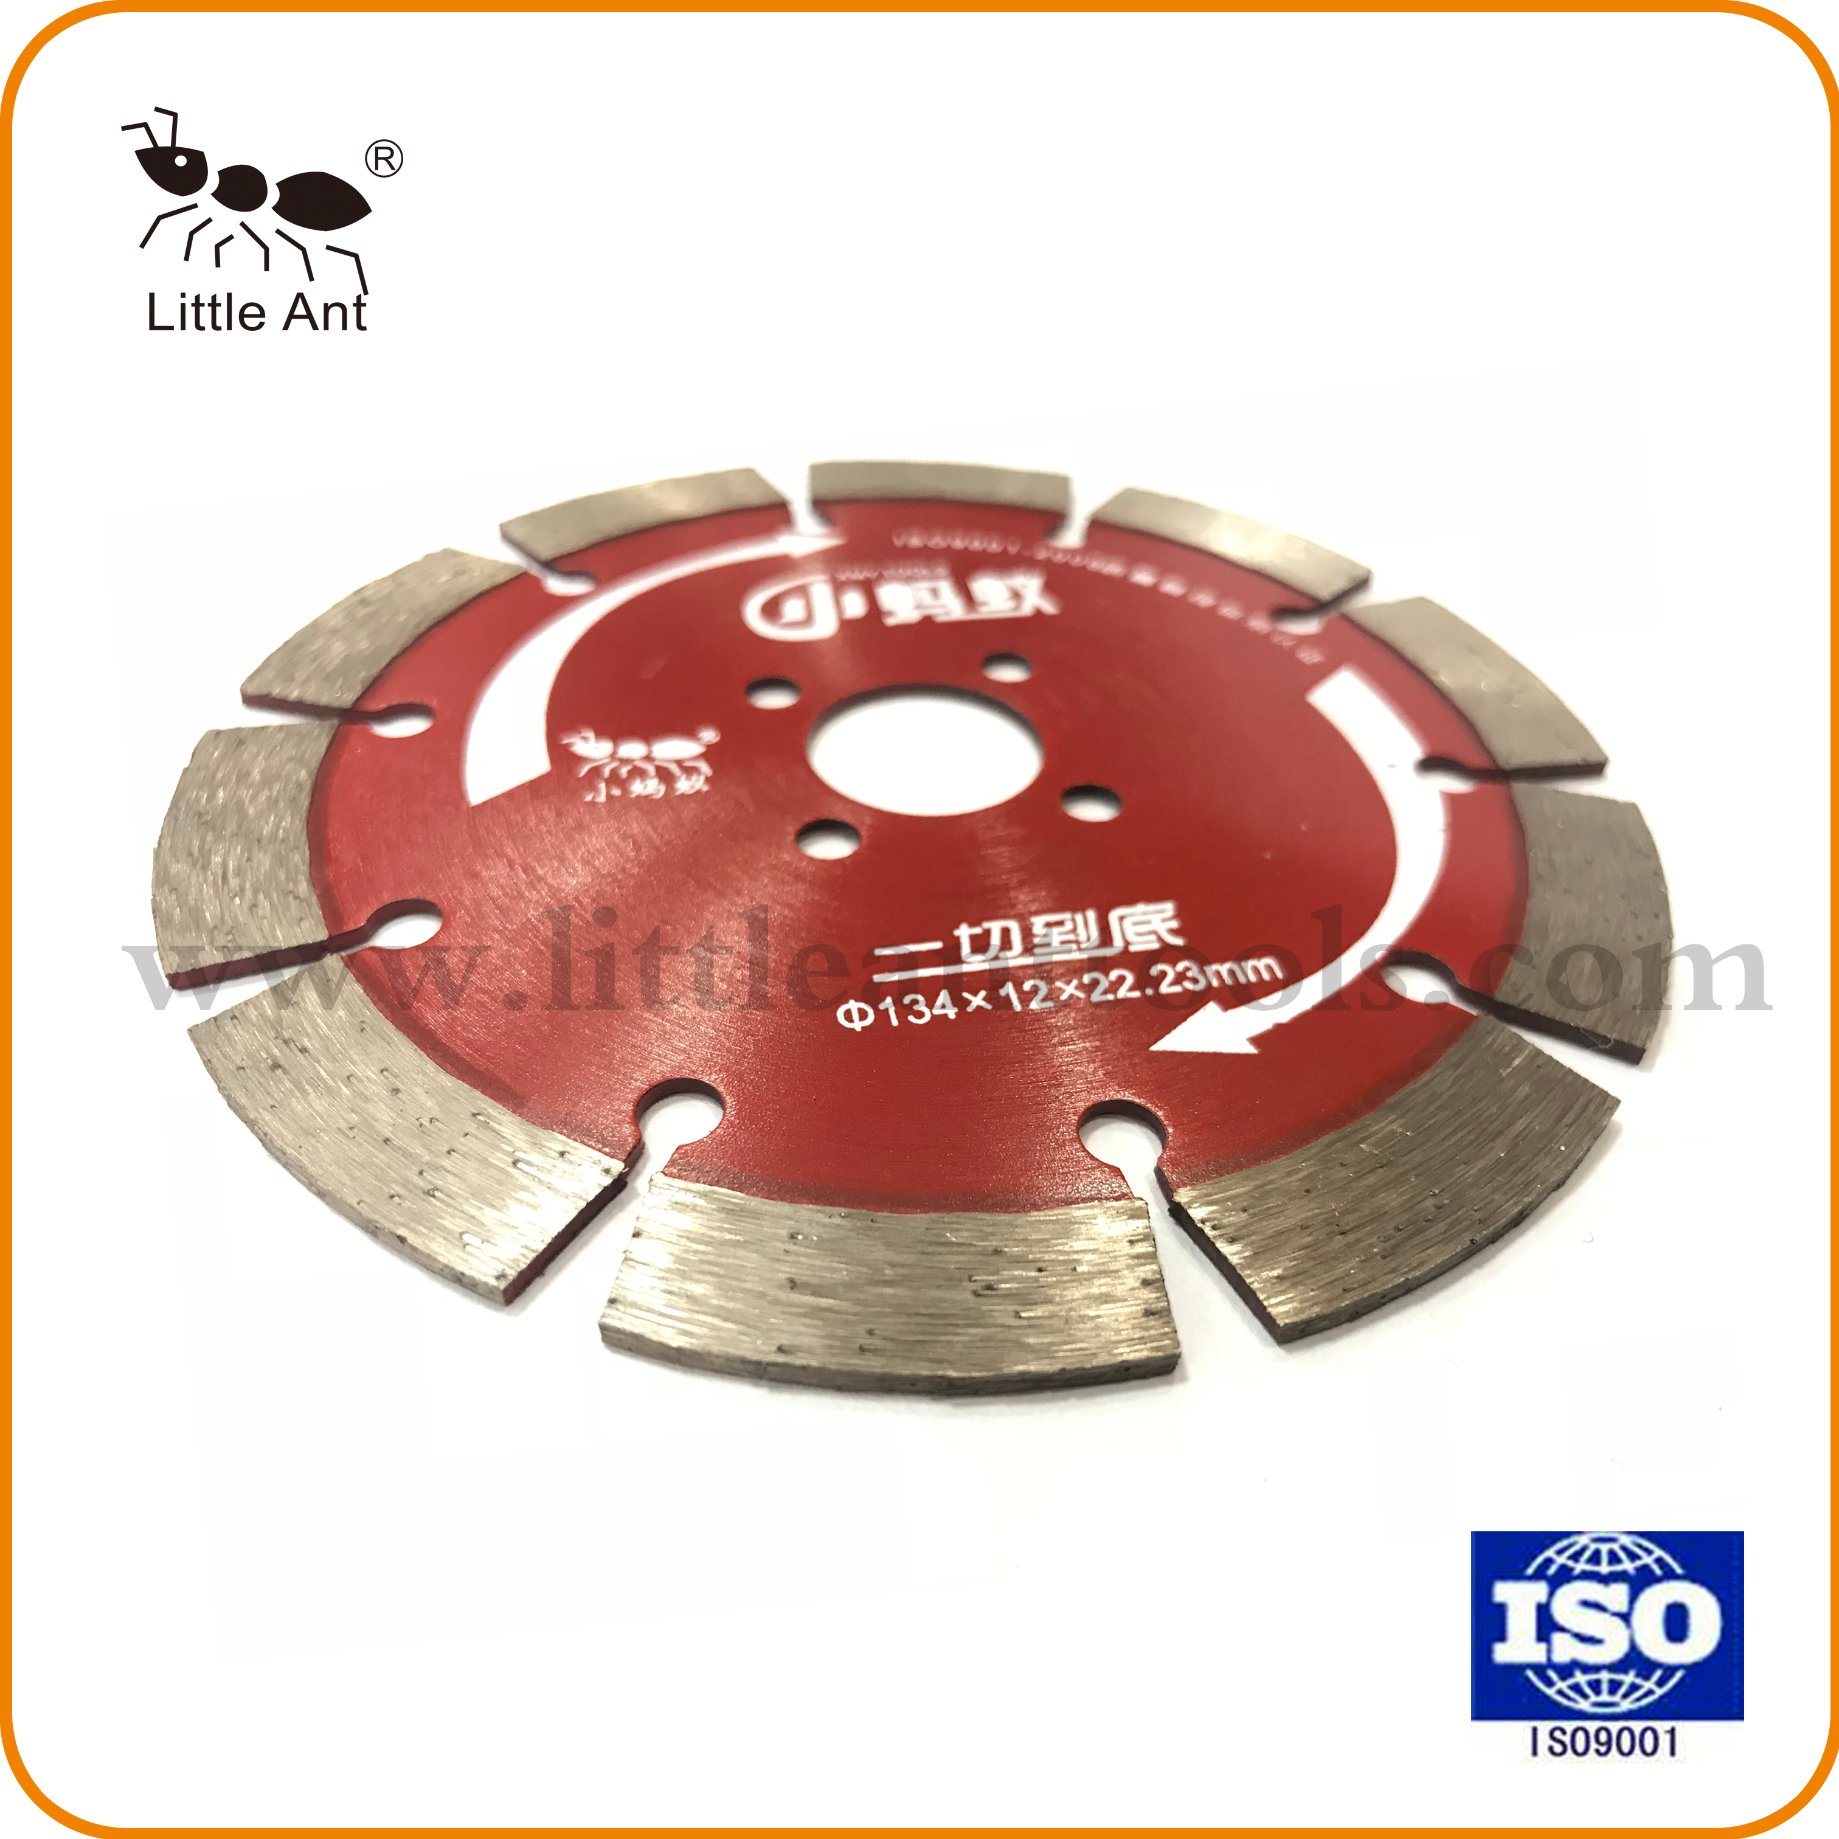 134mm Dry Use Hardware Tools Cutting Disk Hot-Pressed Diamond Saw Blade Red